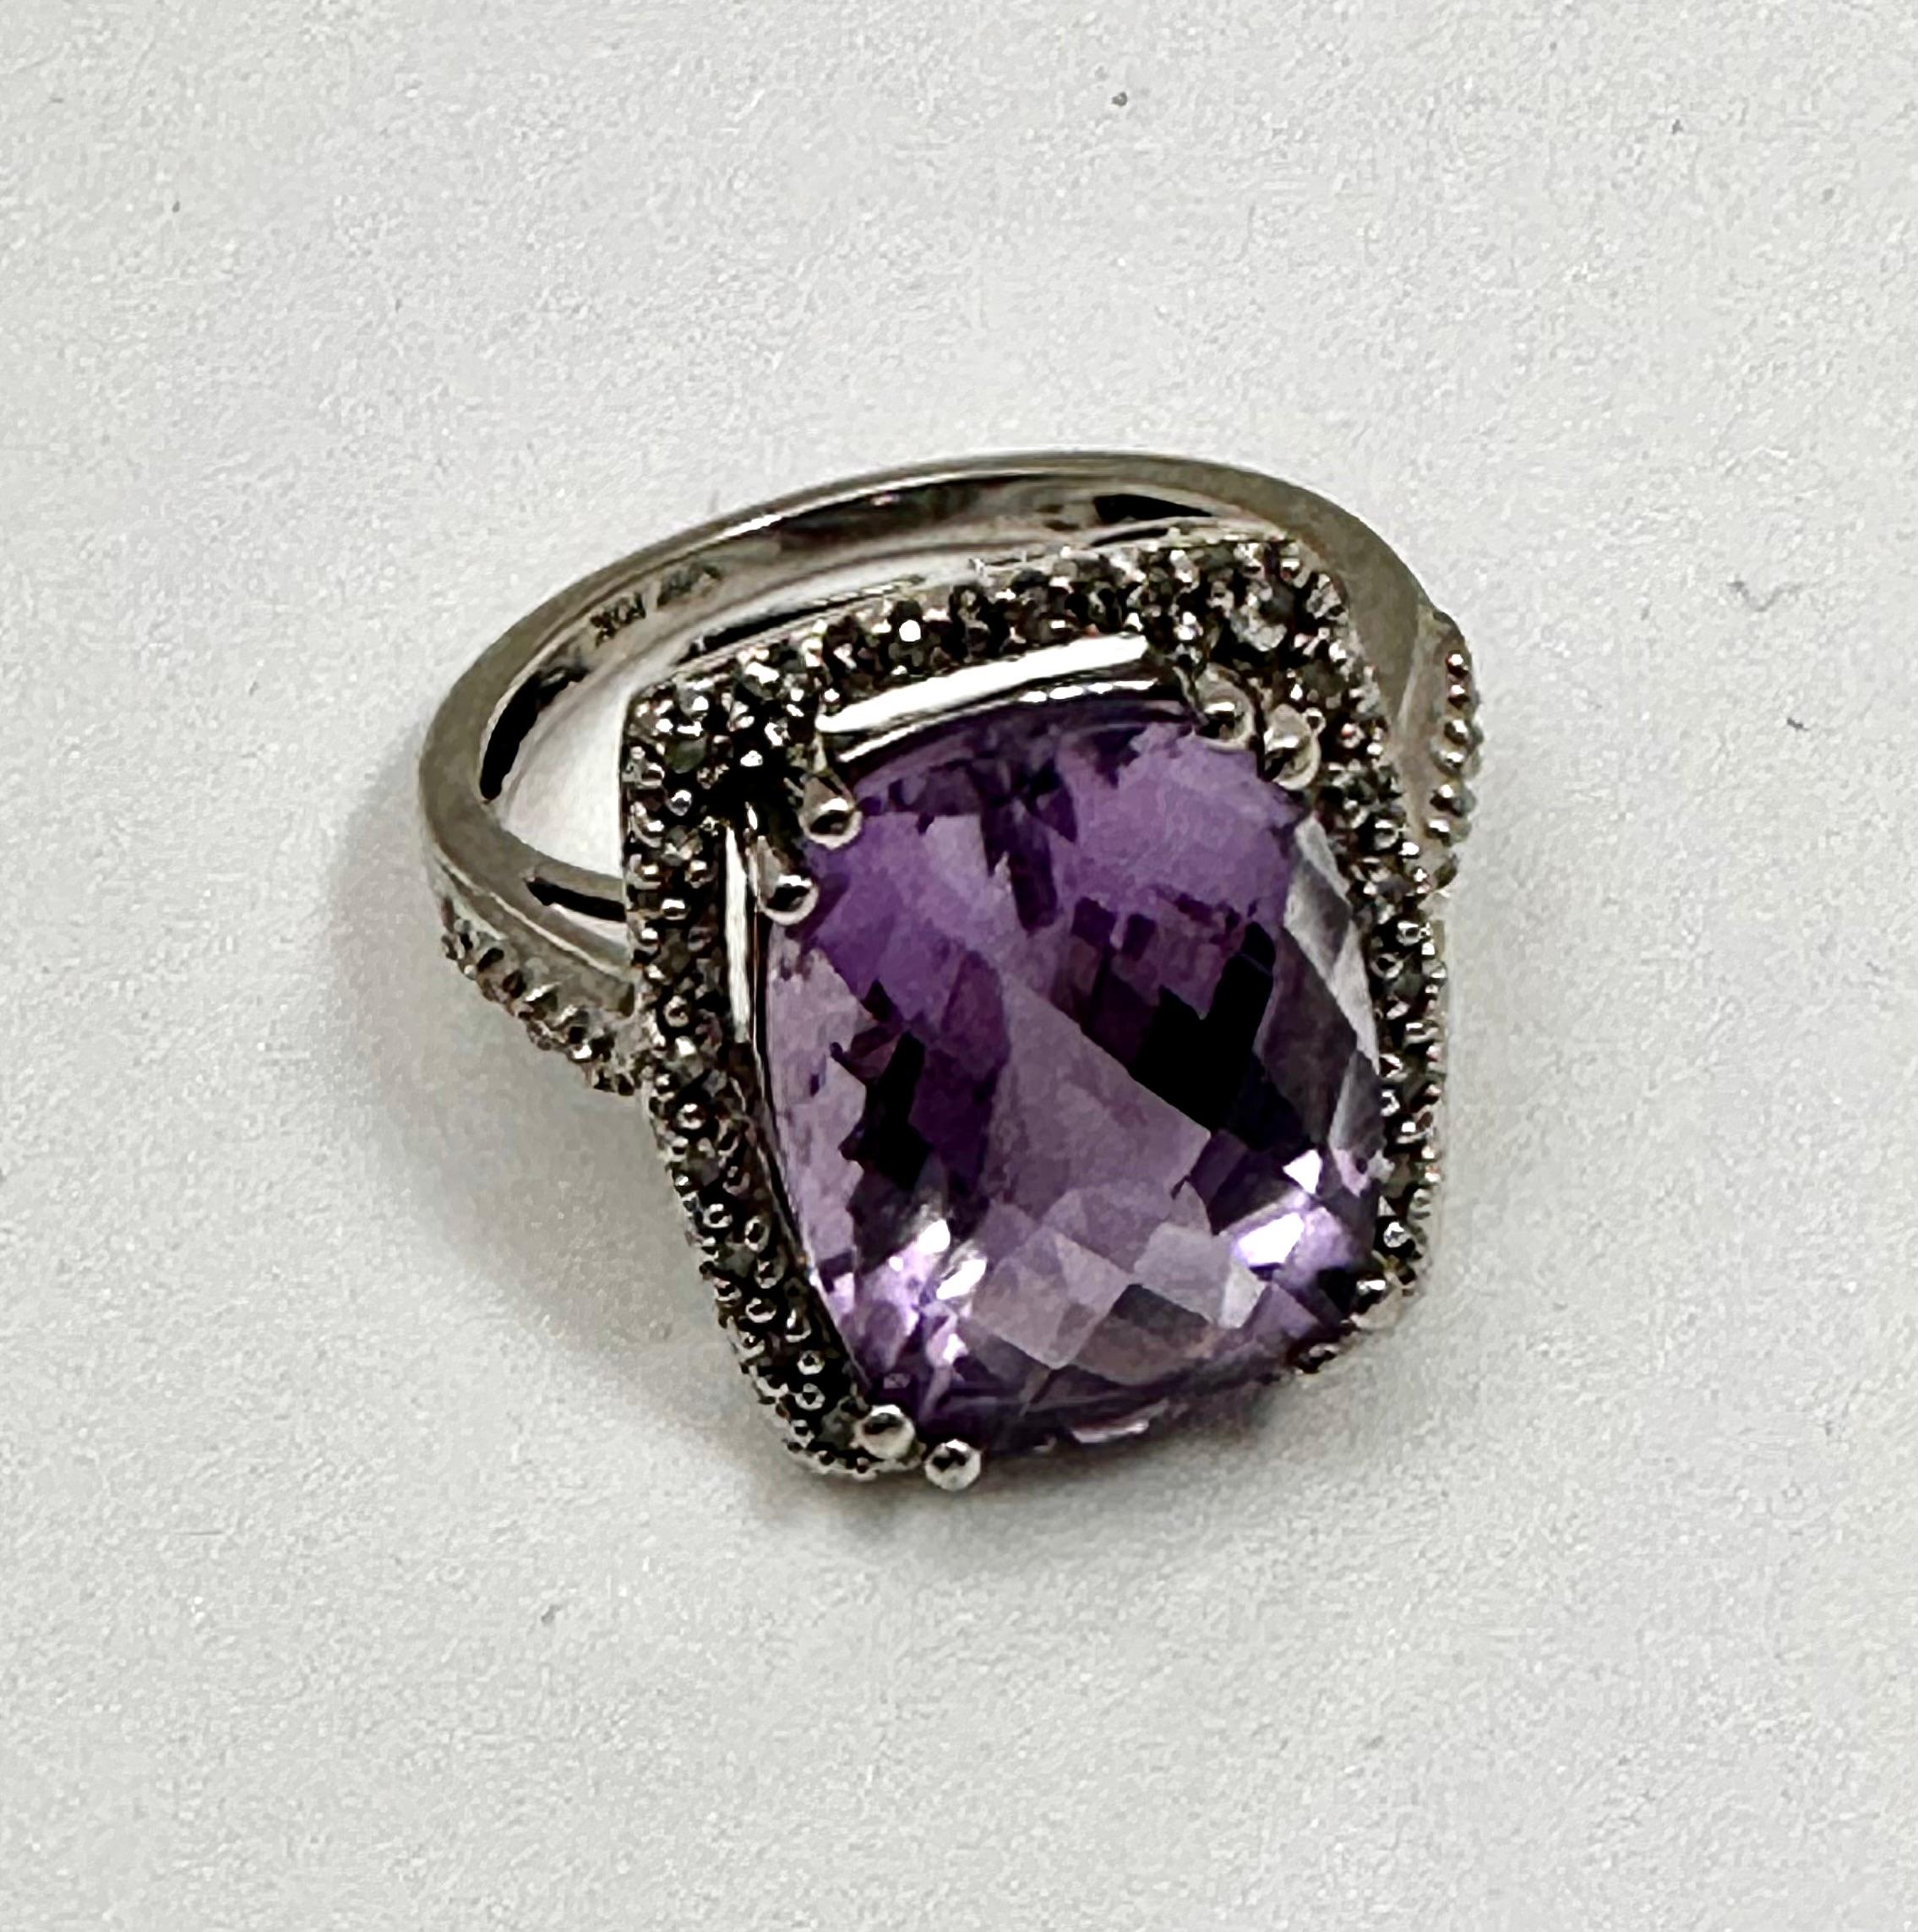 10kt White Gold 11mm x 15mm Cushion Cut Amethyst and Diamond Ring Size 6 3/4
Stone measures approx 11mm x 15mm
Top of ring measures approx 16mm x 18.5

Often viewed as a stone of peace, some believe amethyst's calming presence produces soothing